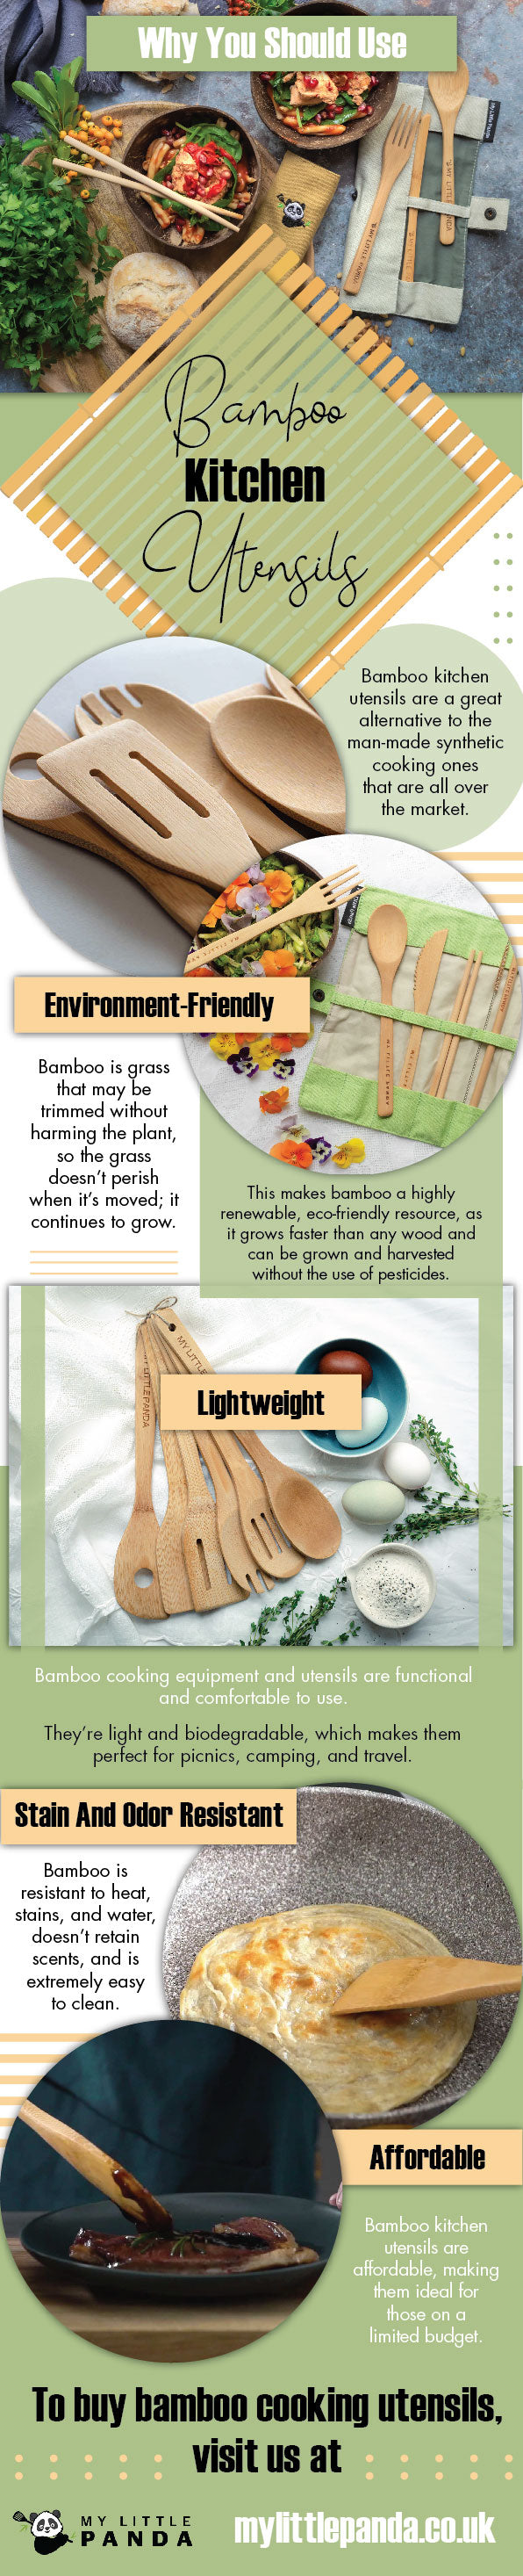 Why You should Use Bamboo Kitchen Utensils - Infograph